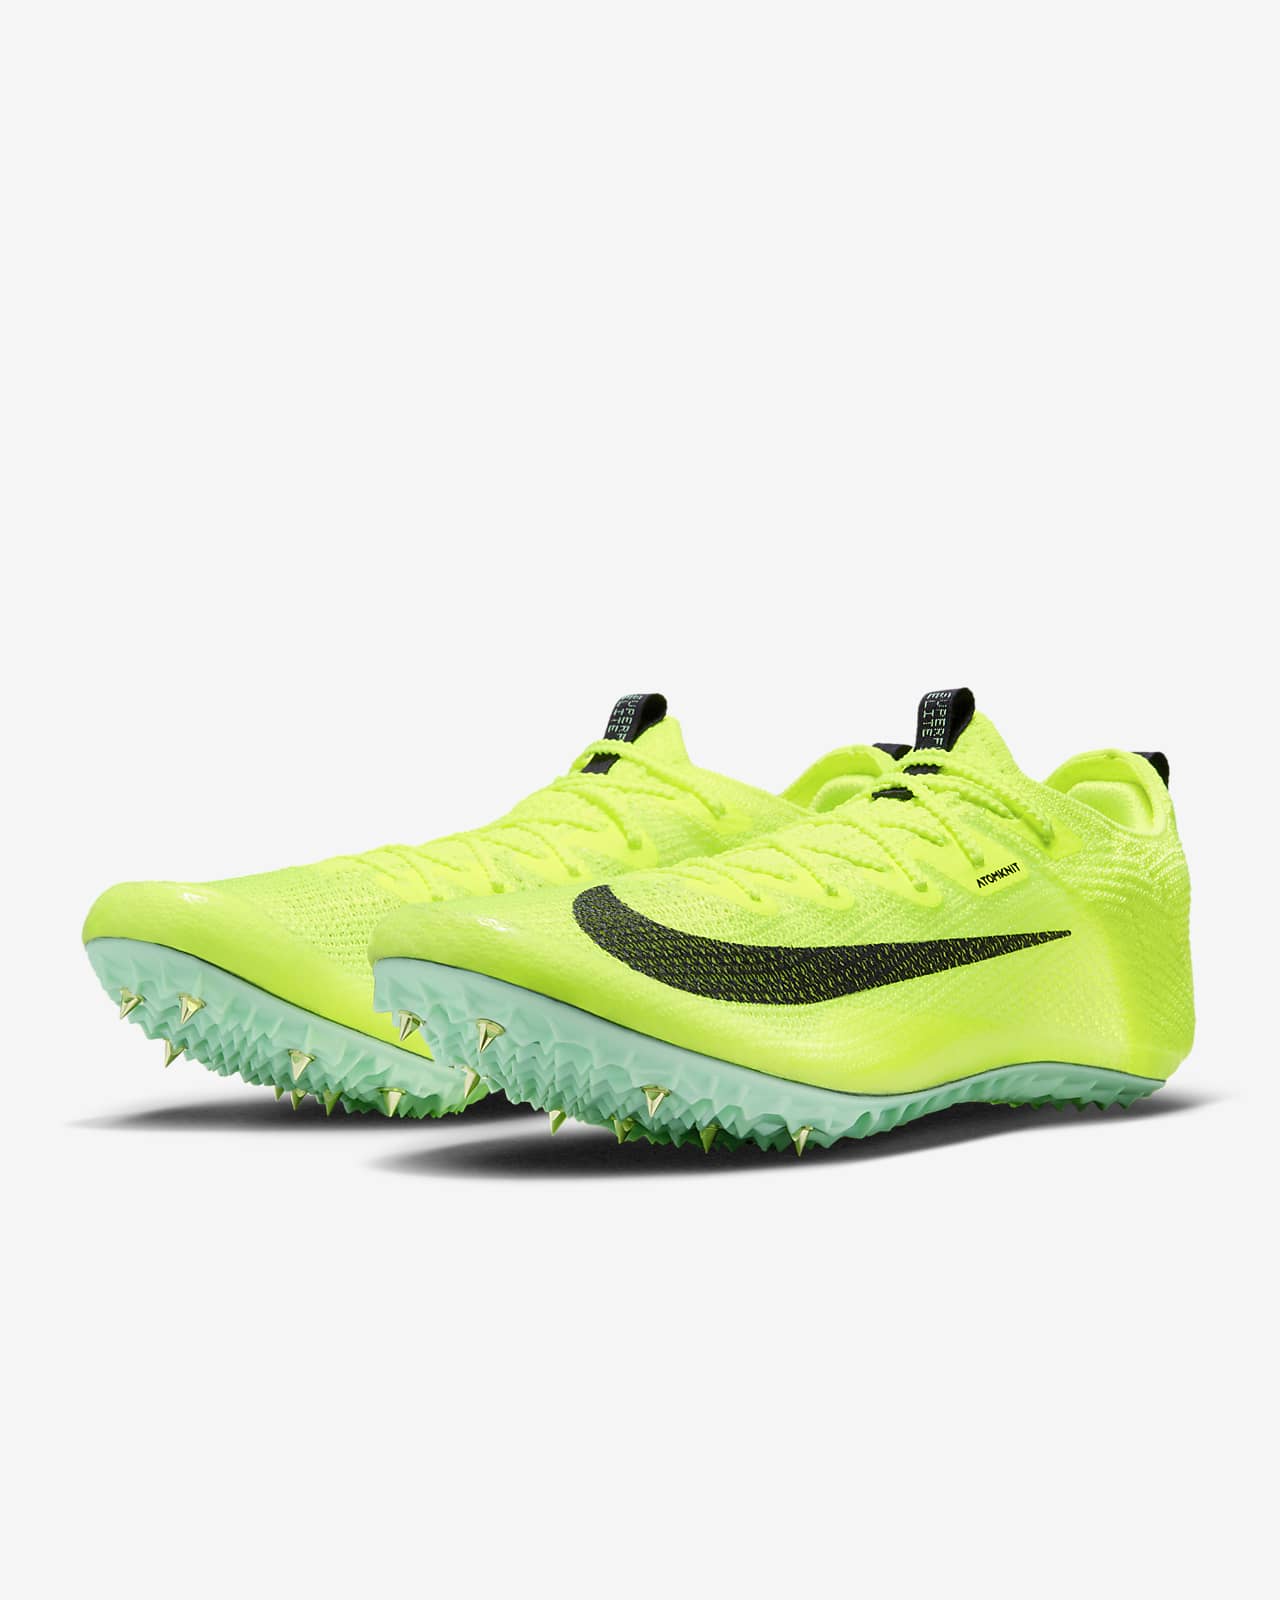 horsepower Suppose Deception Nike Zoom Superfly Elite 2 Track & Field Sprinting Spikes. Nike.com